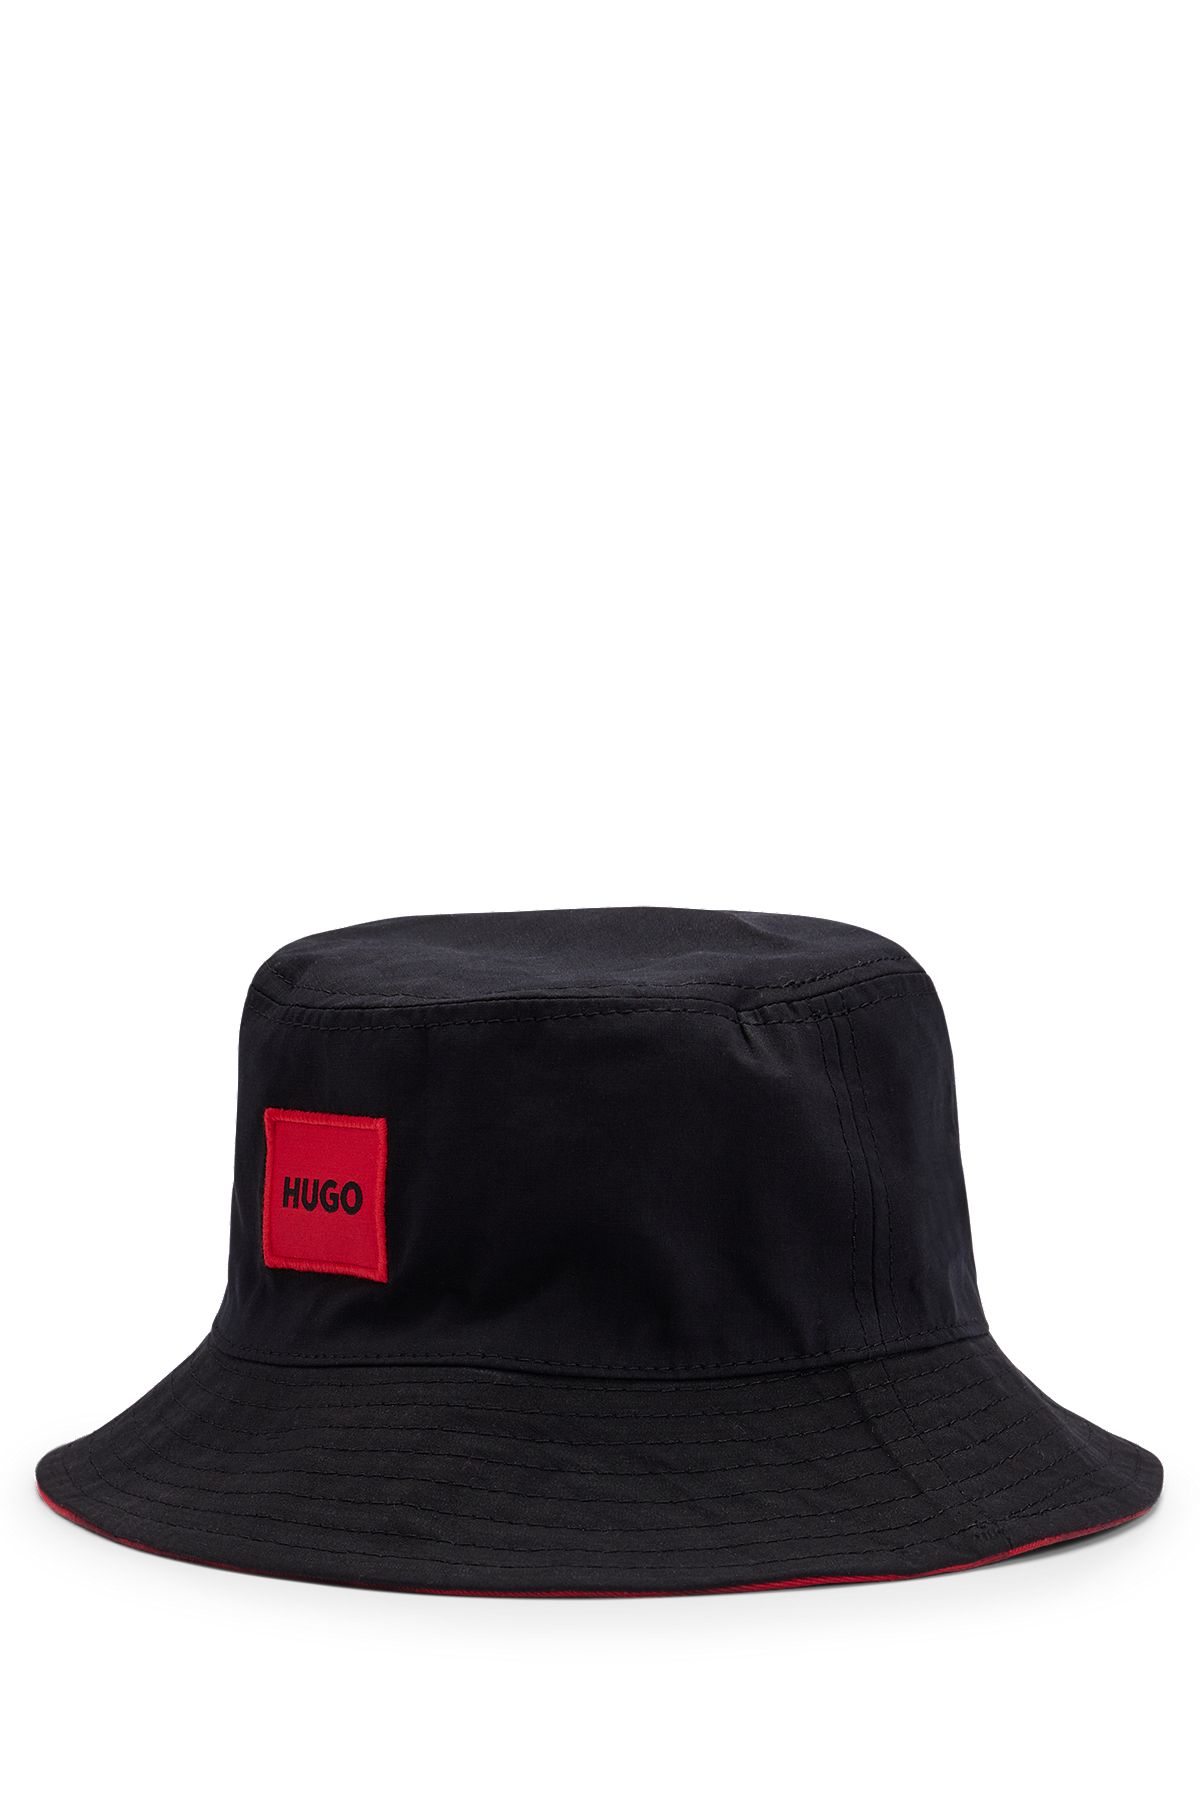 Cotton-twill bucket hat with red logo label, Black